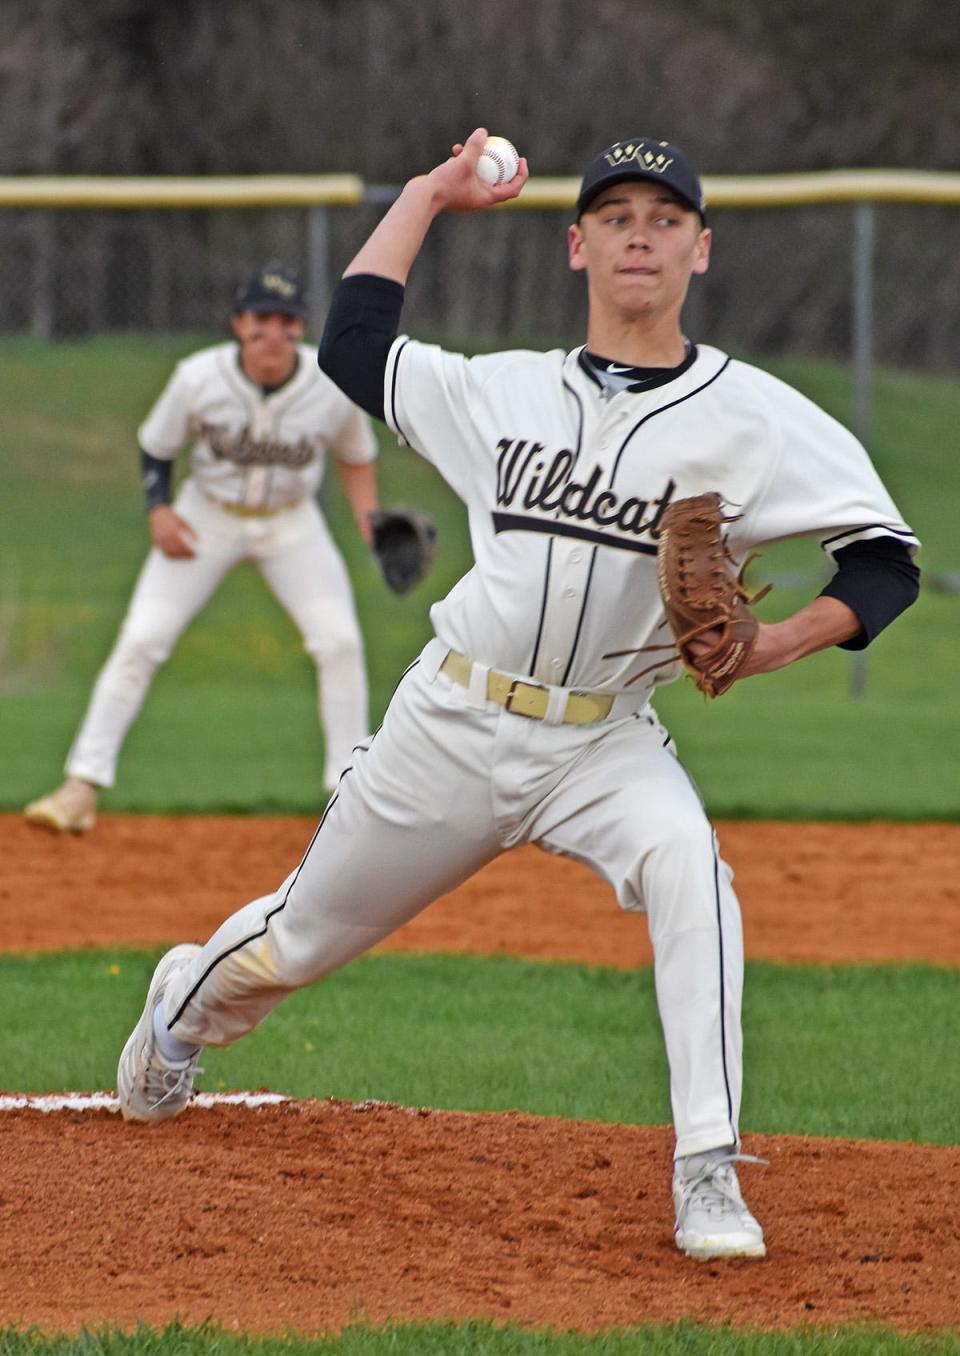 Ethan Grodack of Western Wayne will play a key role on the mound and at the plate this spring in Lackawanna League action.